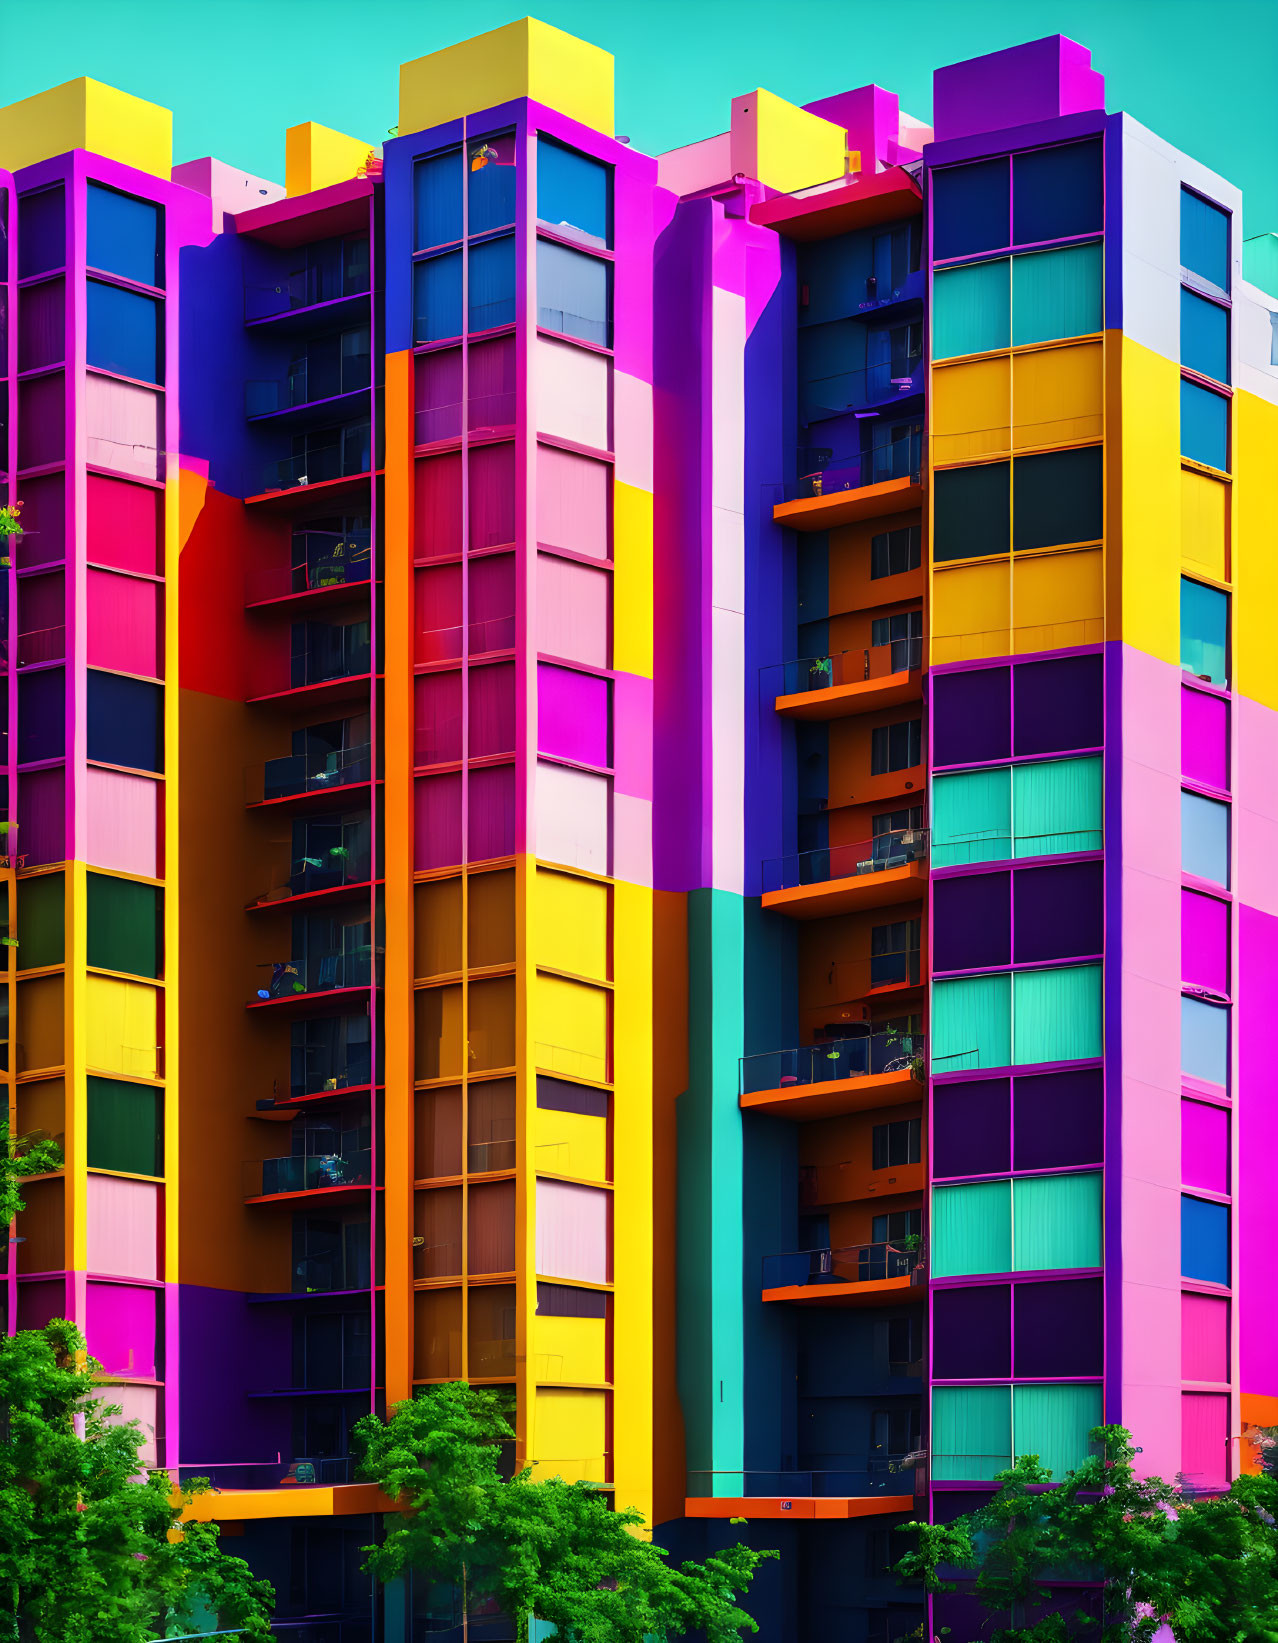 Colorful Multi-Colored Apartment Building with Balconies